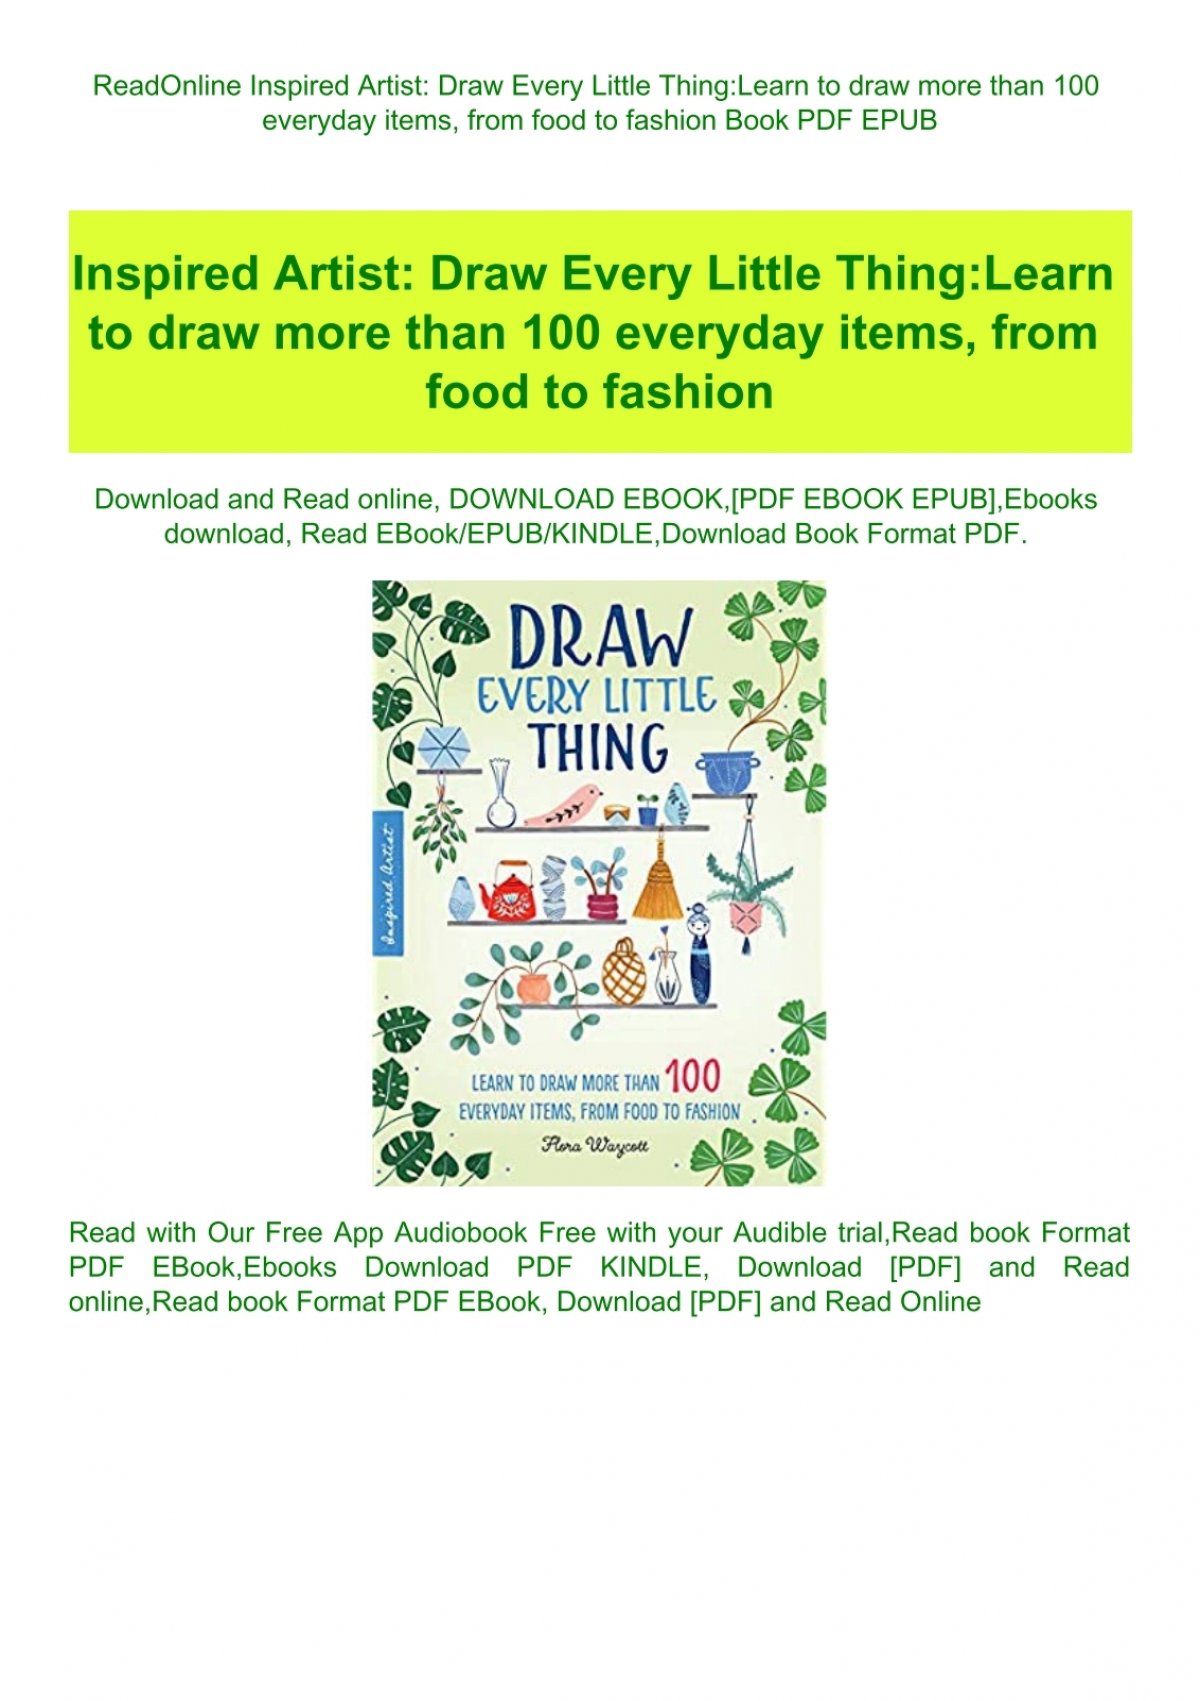 ReadOnline Inspired Artist Draw Every Little ThingLearn to draw more